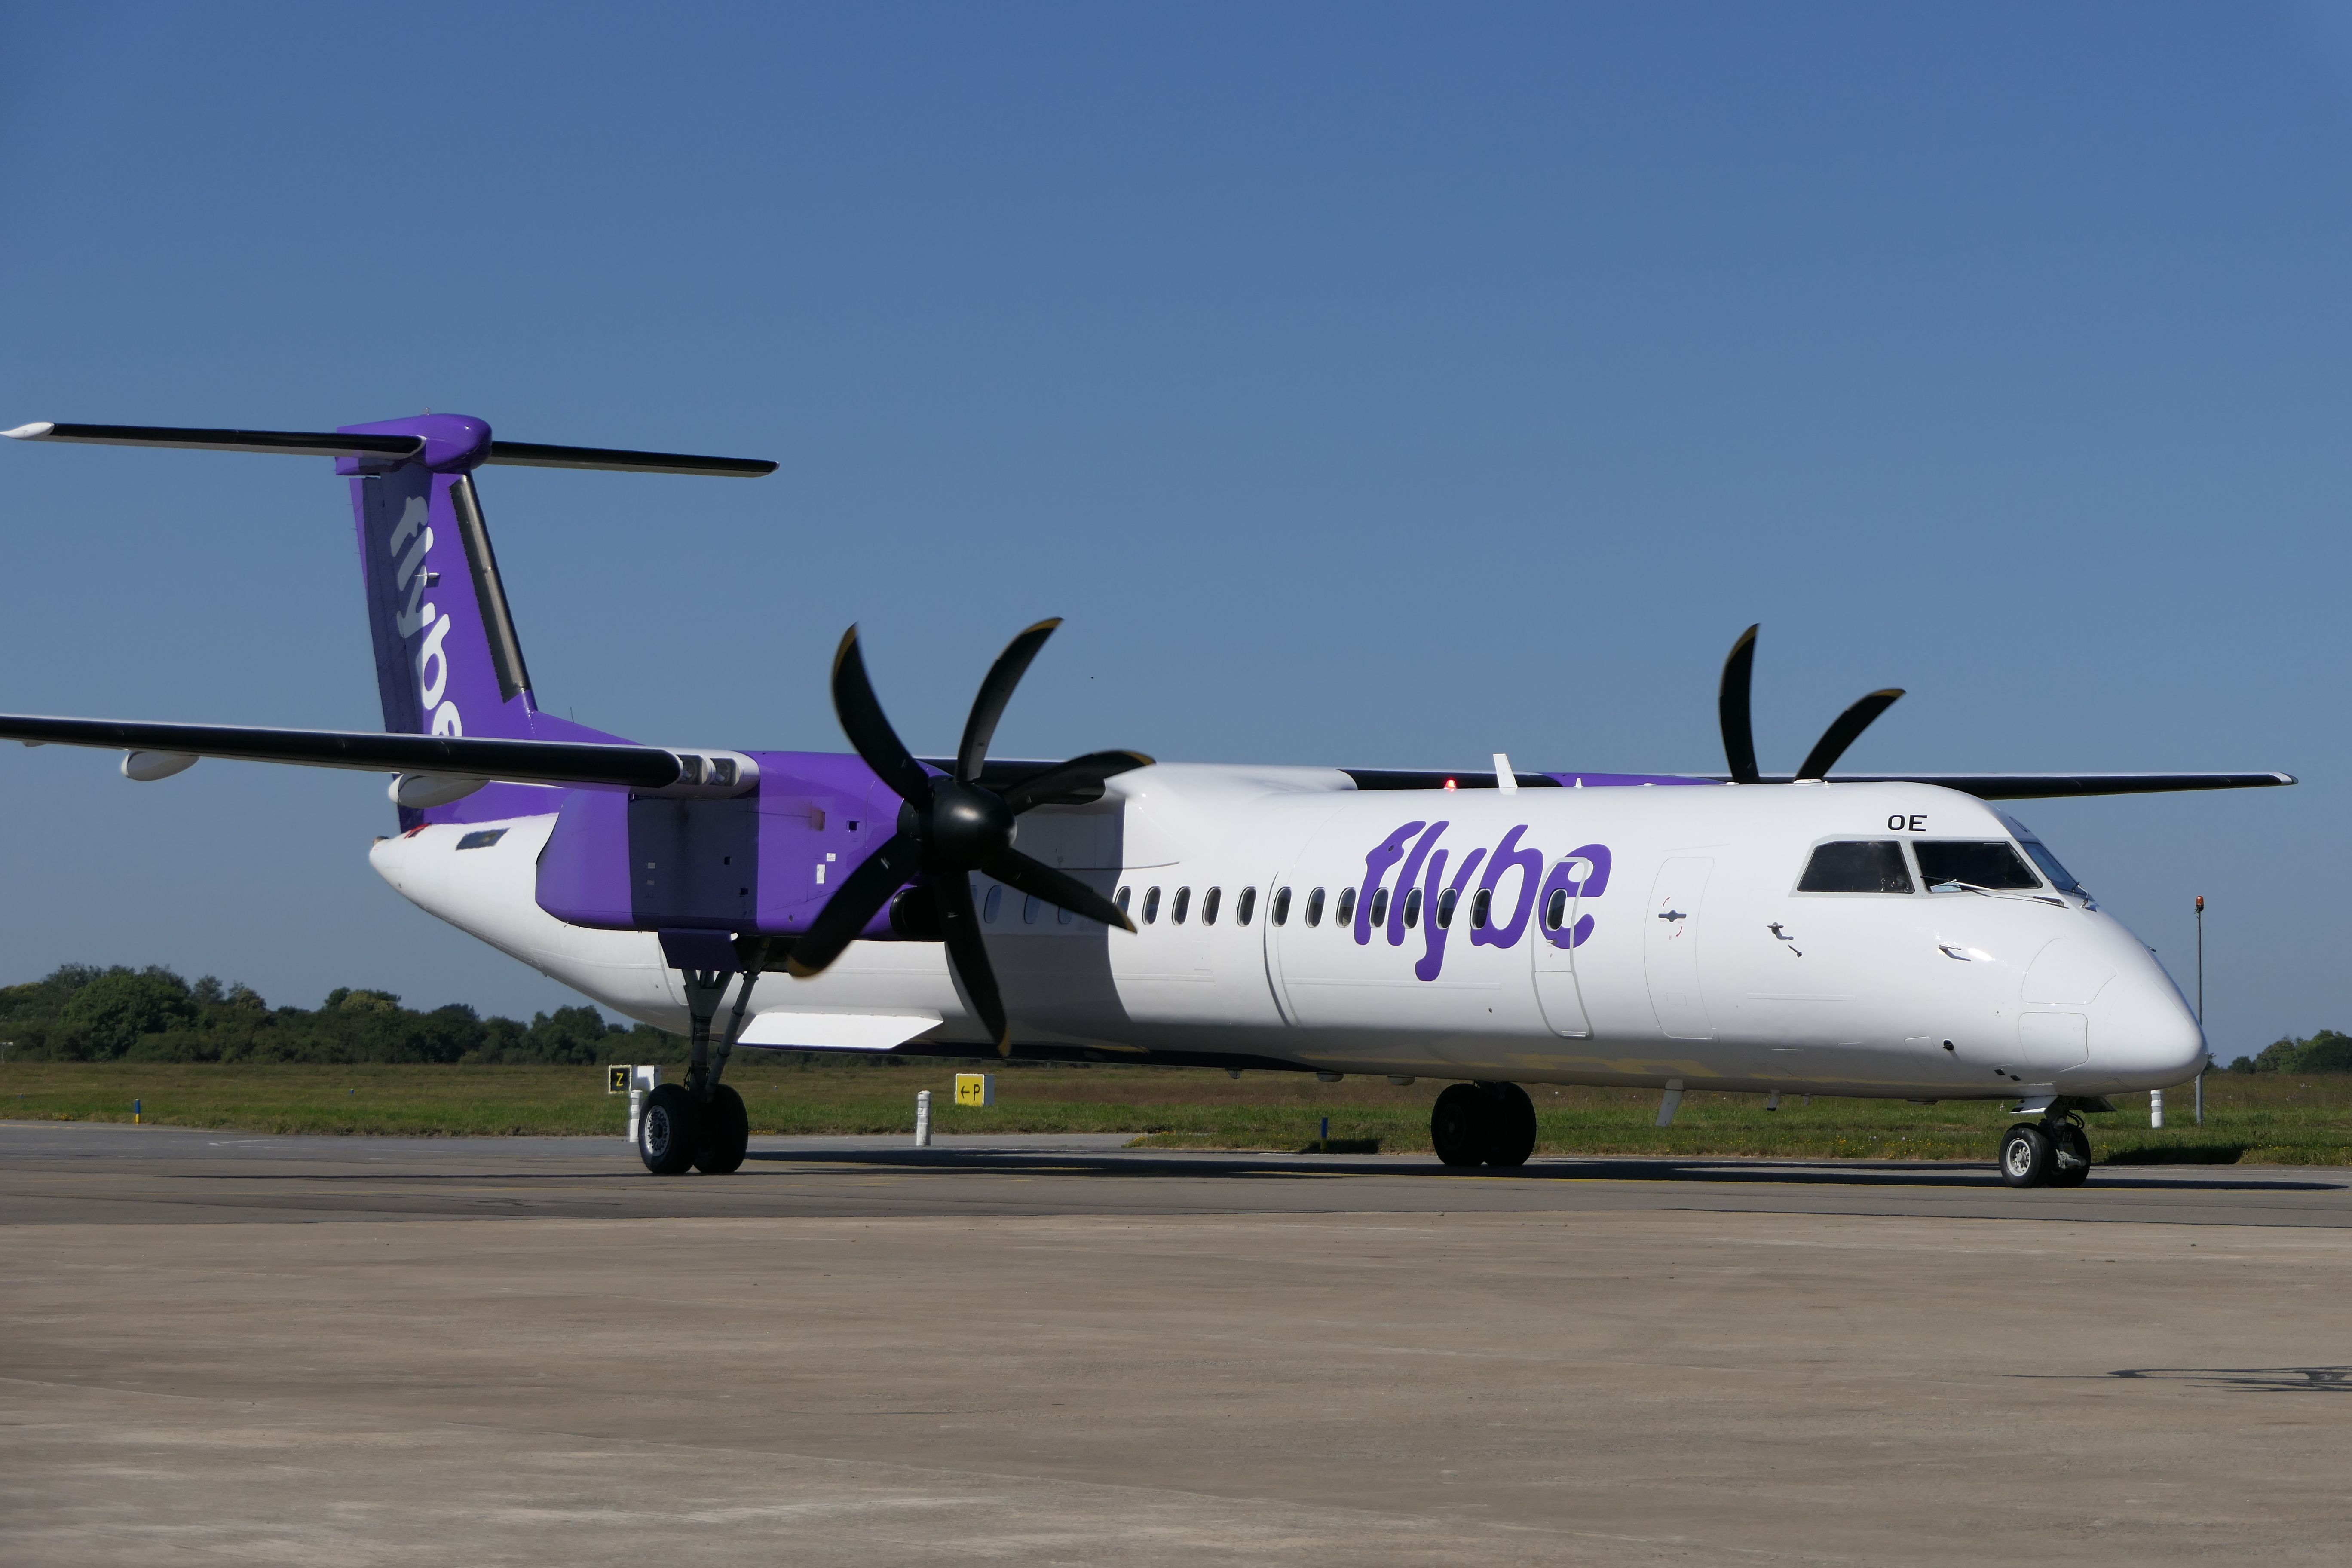 A new Flybe plane on the runway